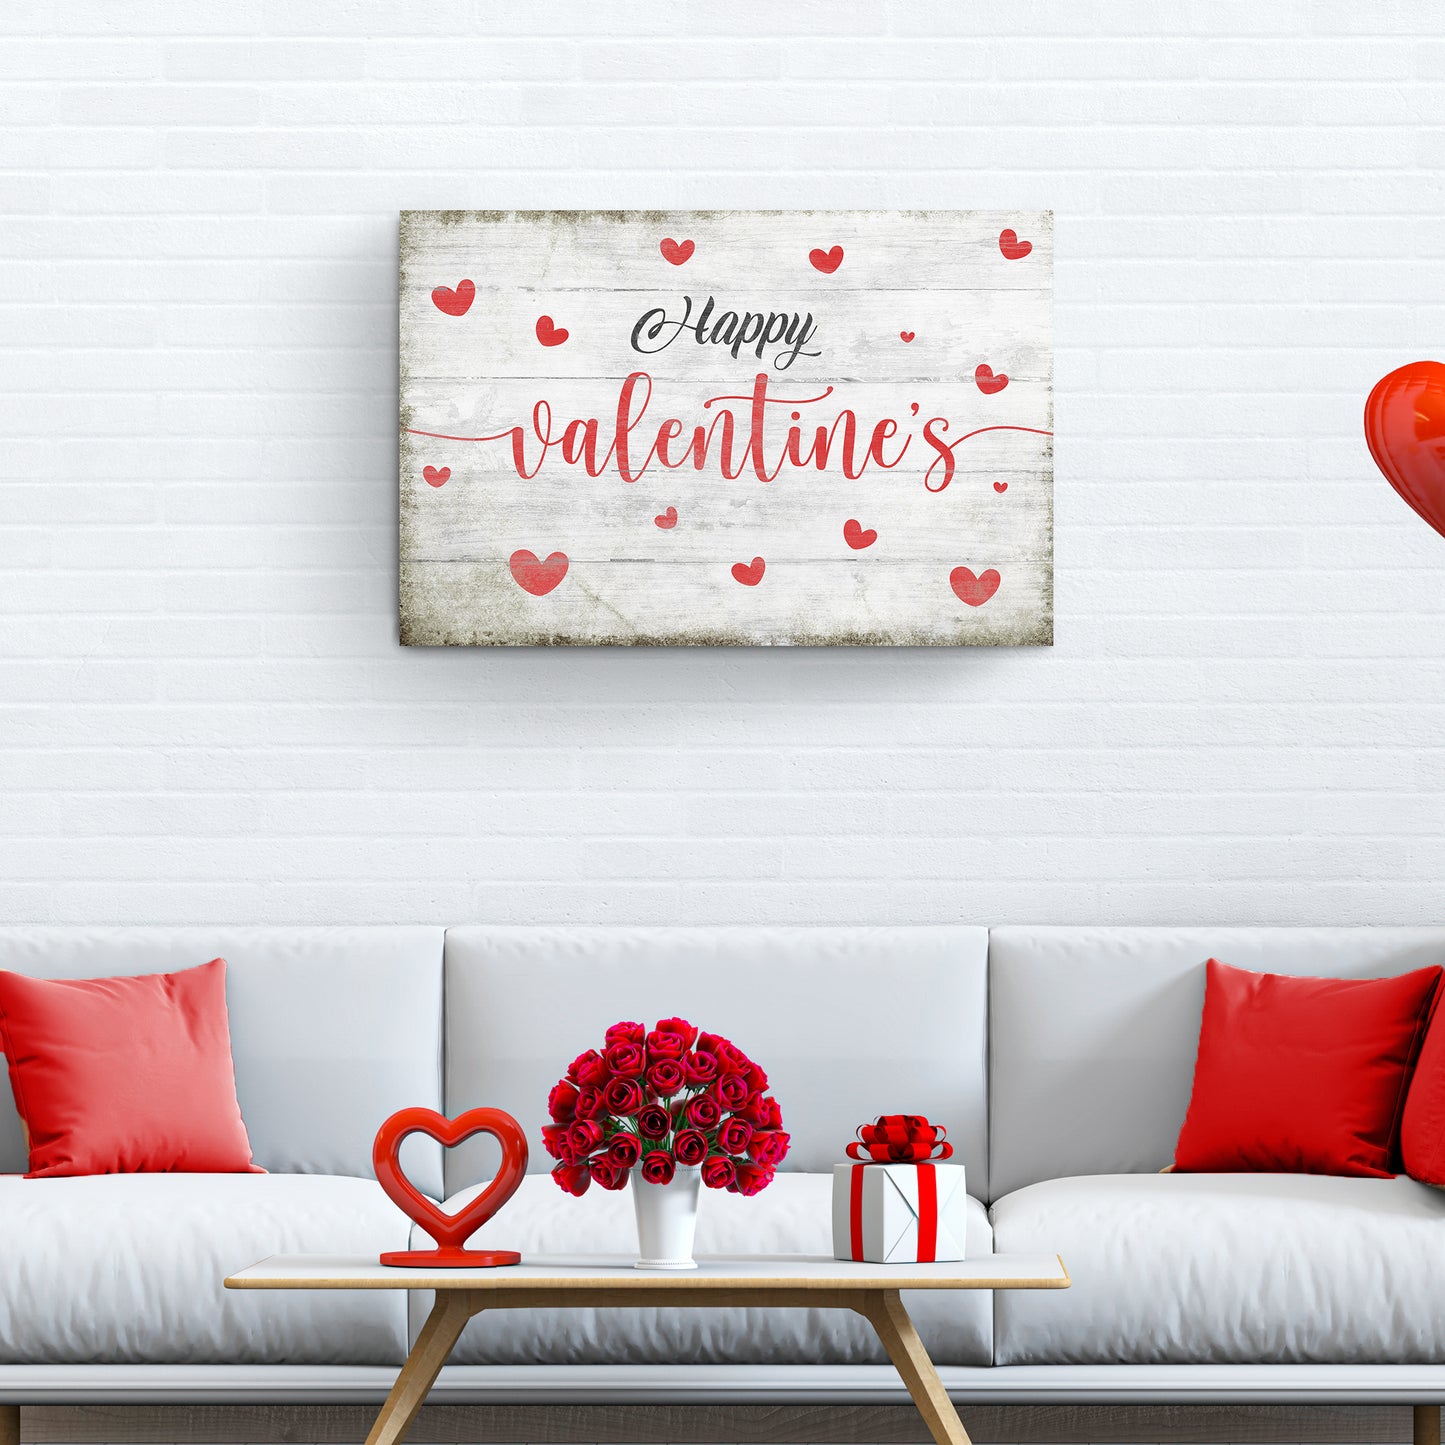 Rustic Valentine Saying Sign